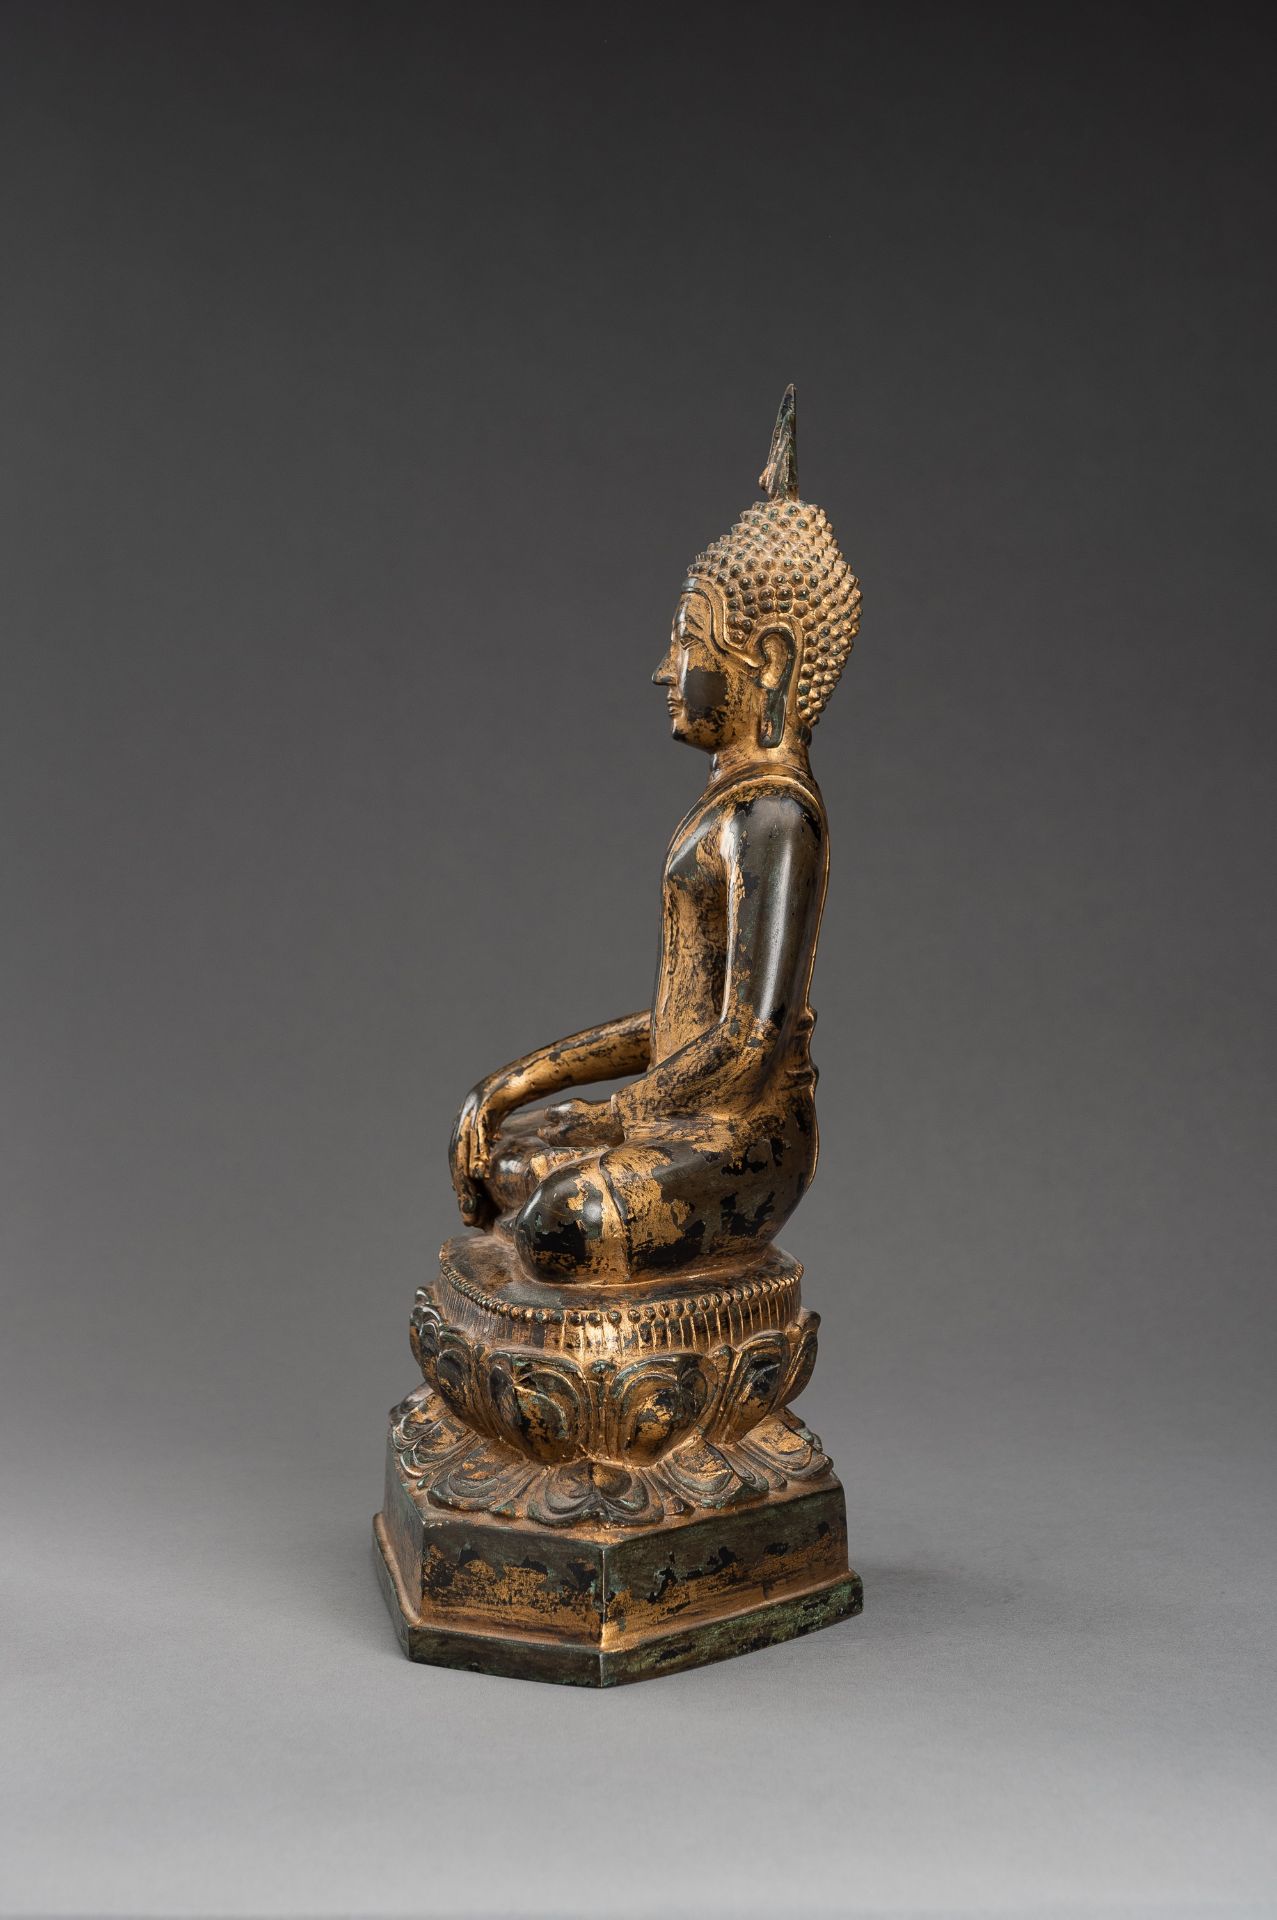 A LARGE GOLD LACQUERED BRONZE FIGURE OF BUDDHA - Image 4 of 10